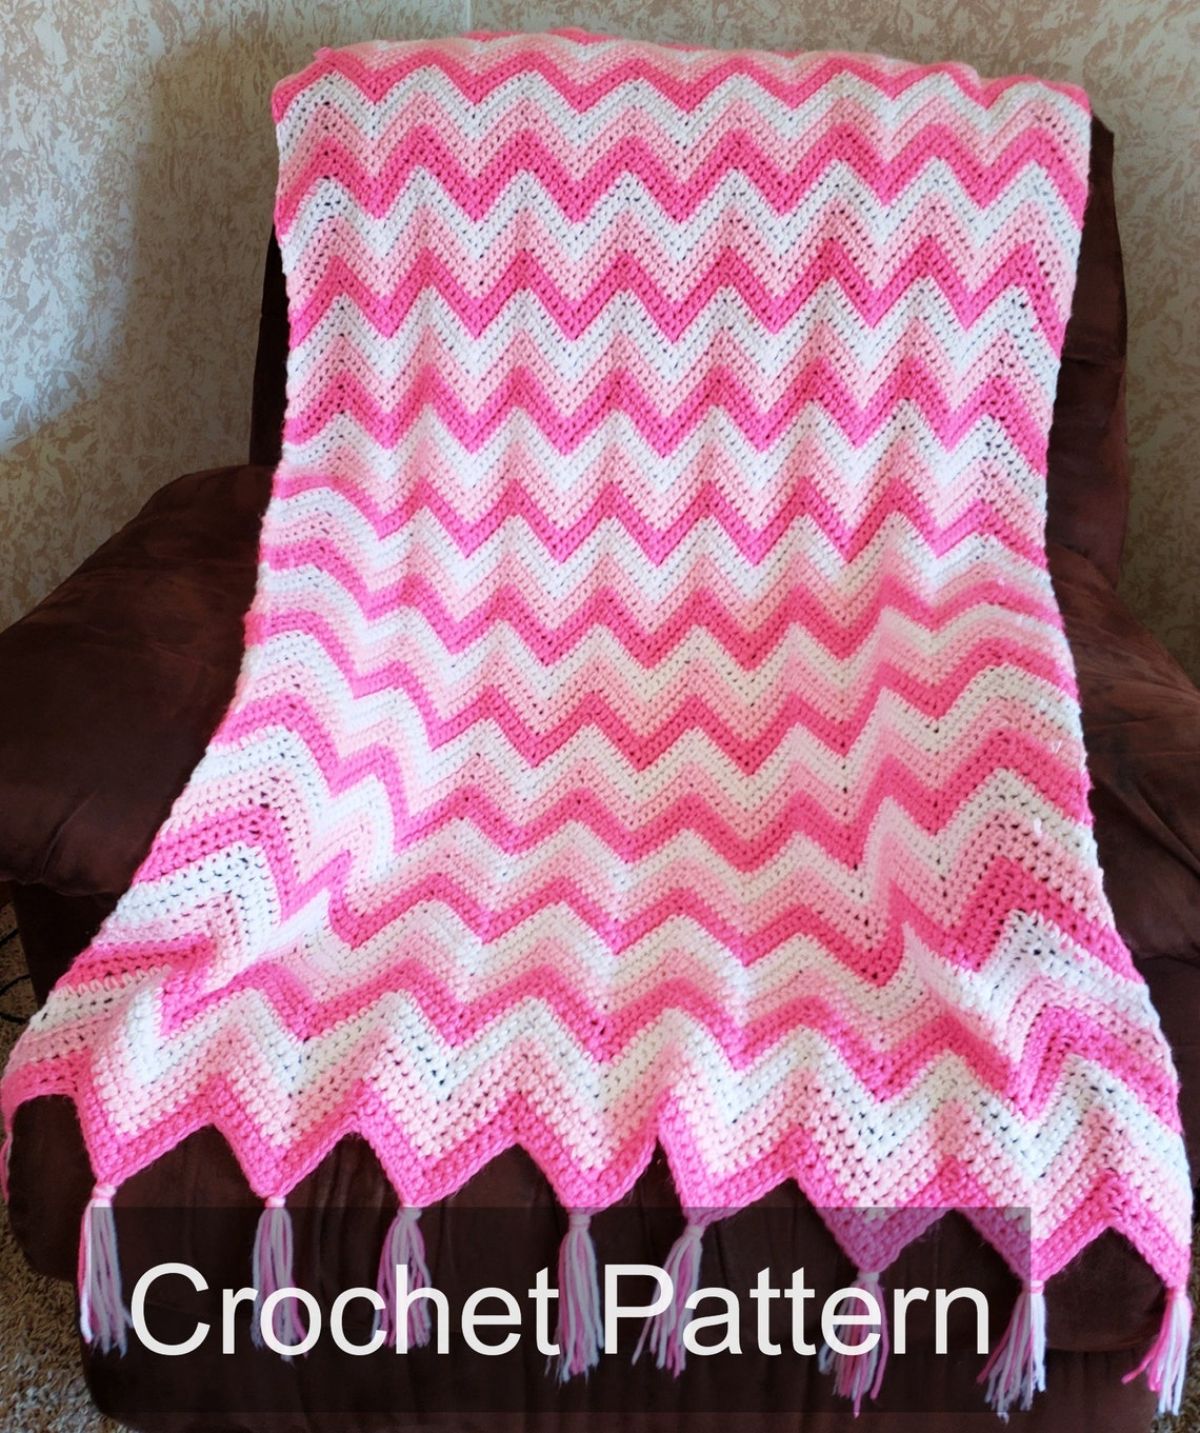 Light pink, pink, and white crochet chevron style blanket with pink tassels on the bottom draped over a brown chair.